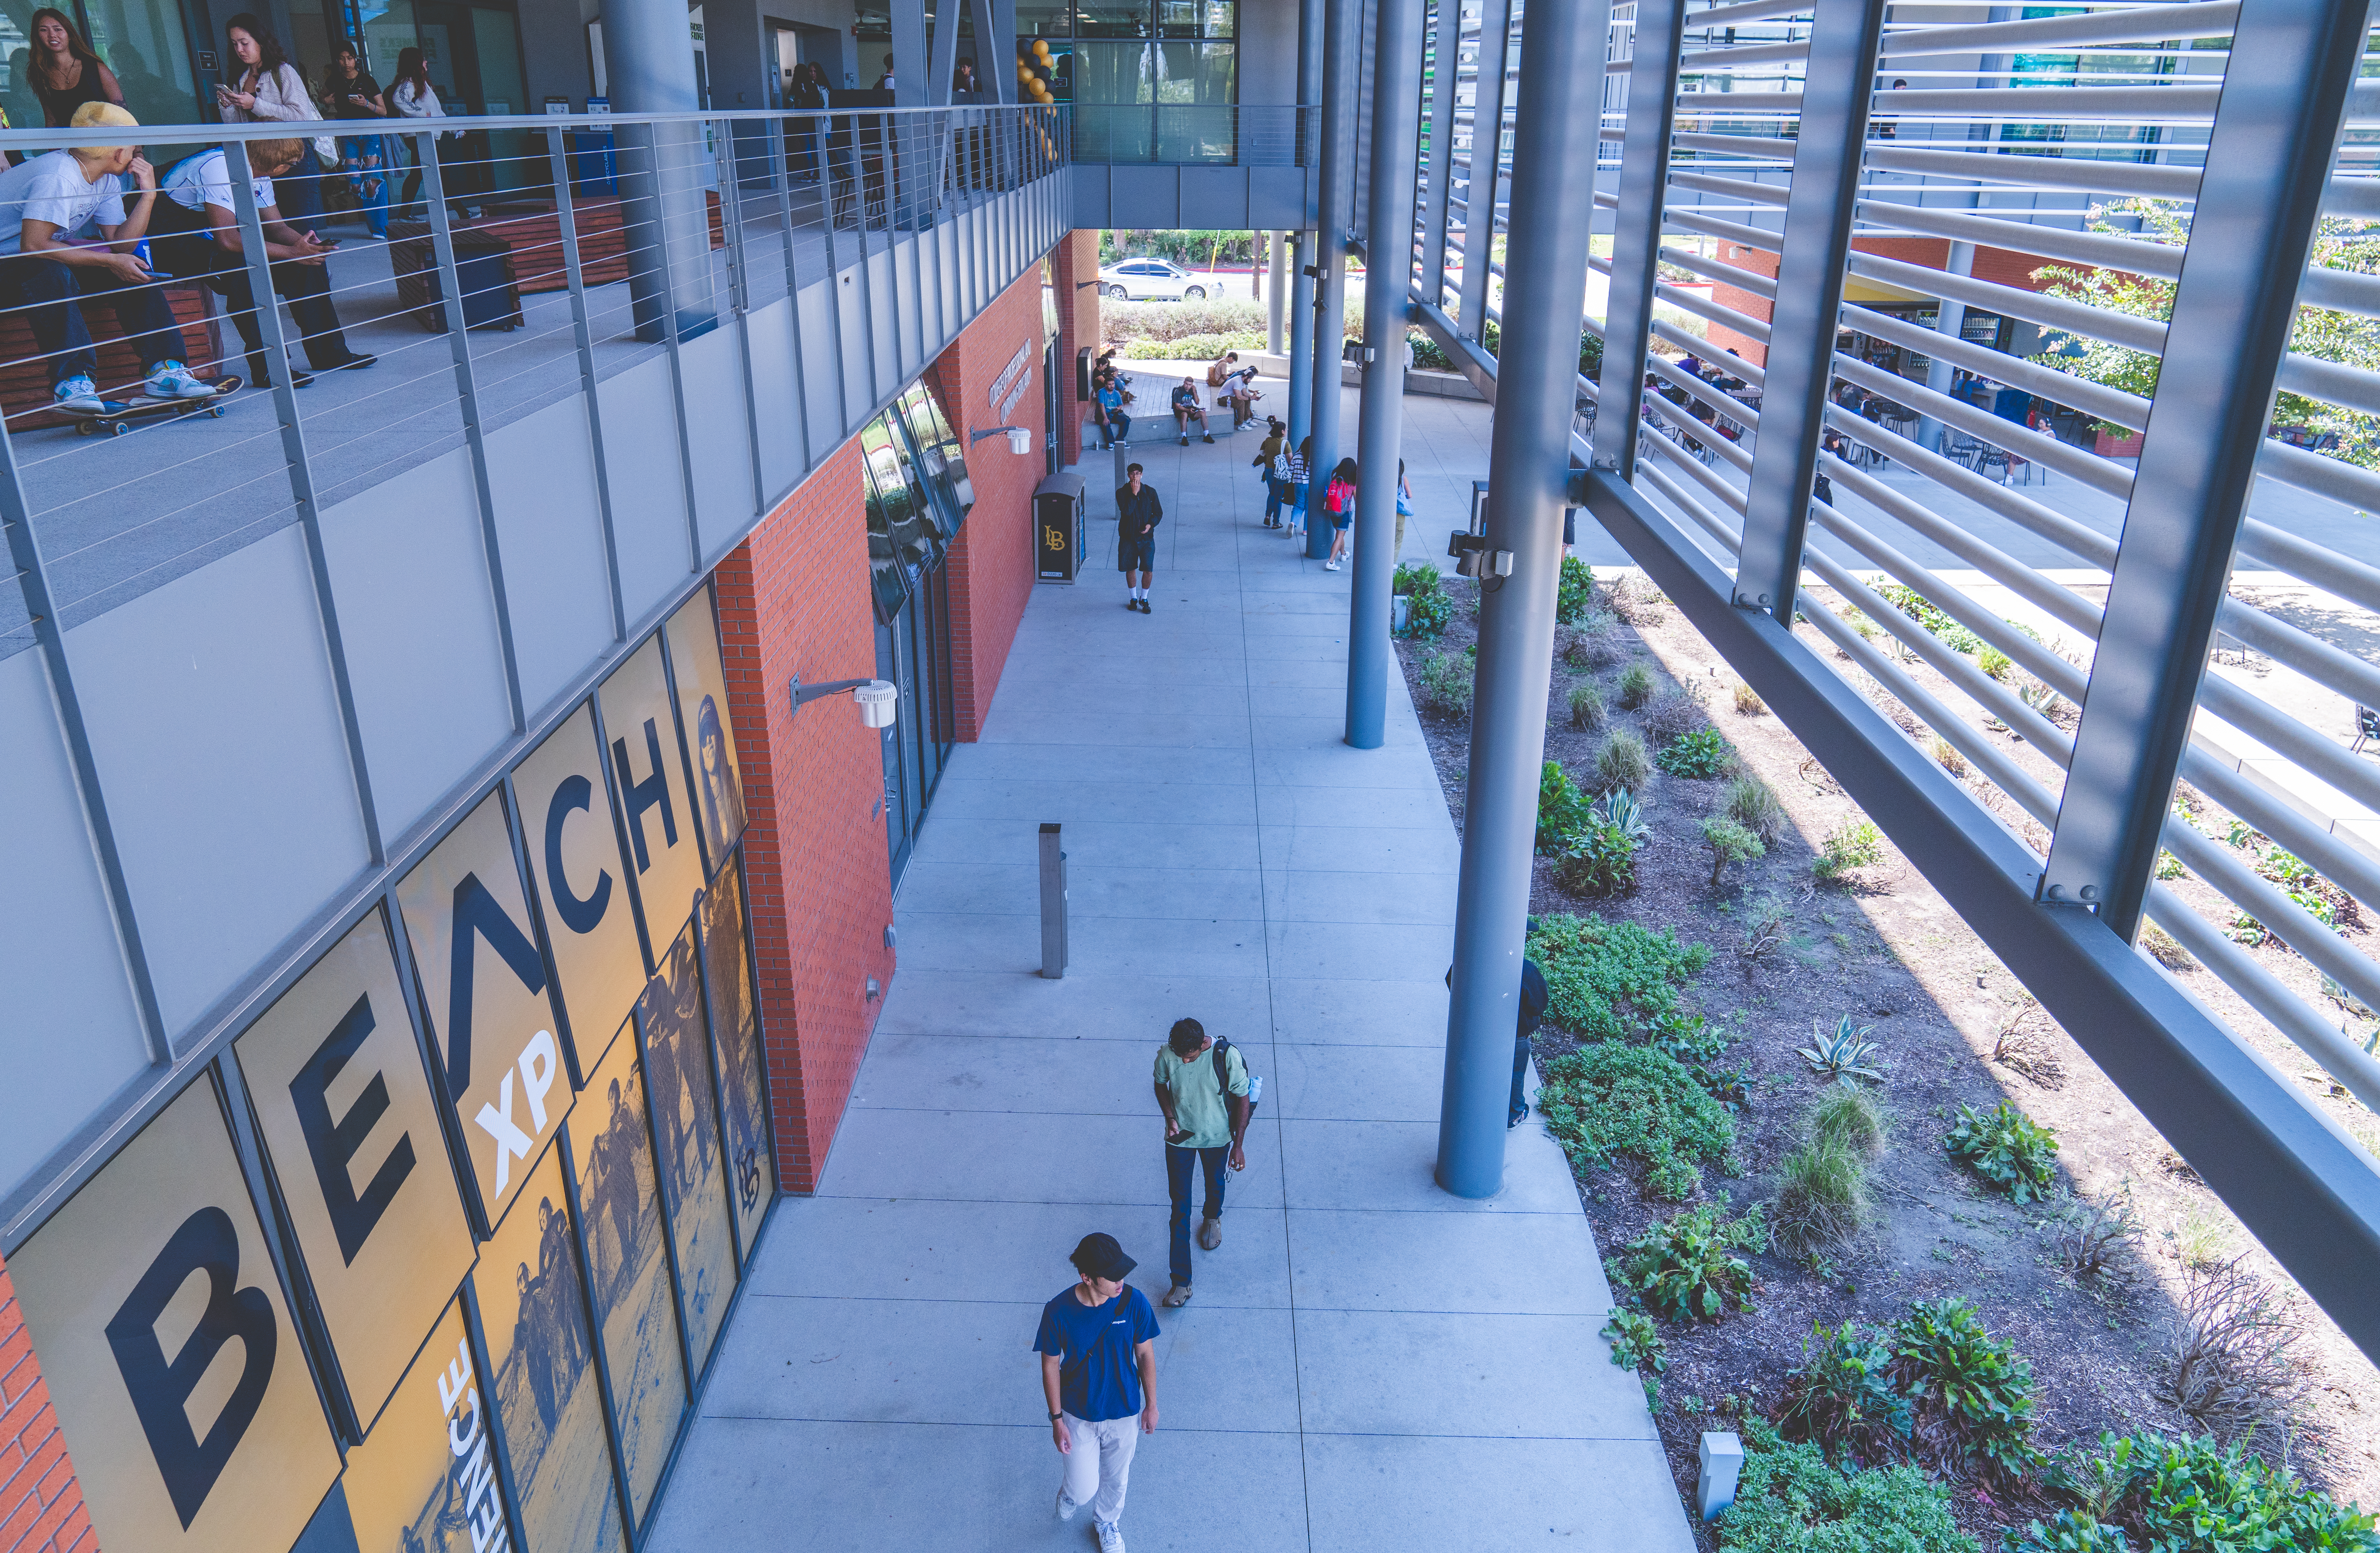 Students walk through the courtyard on the first day of school.